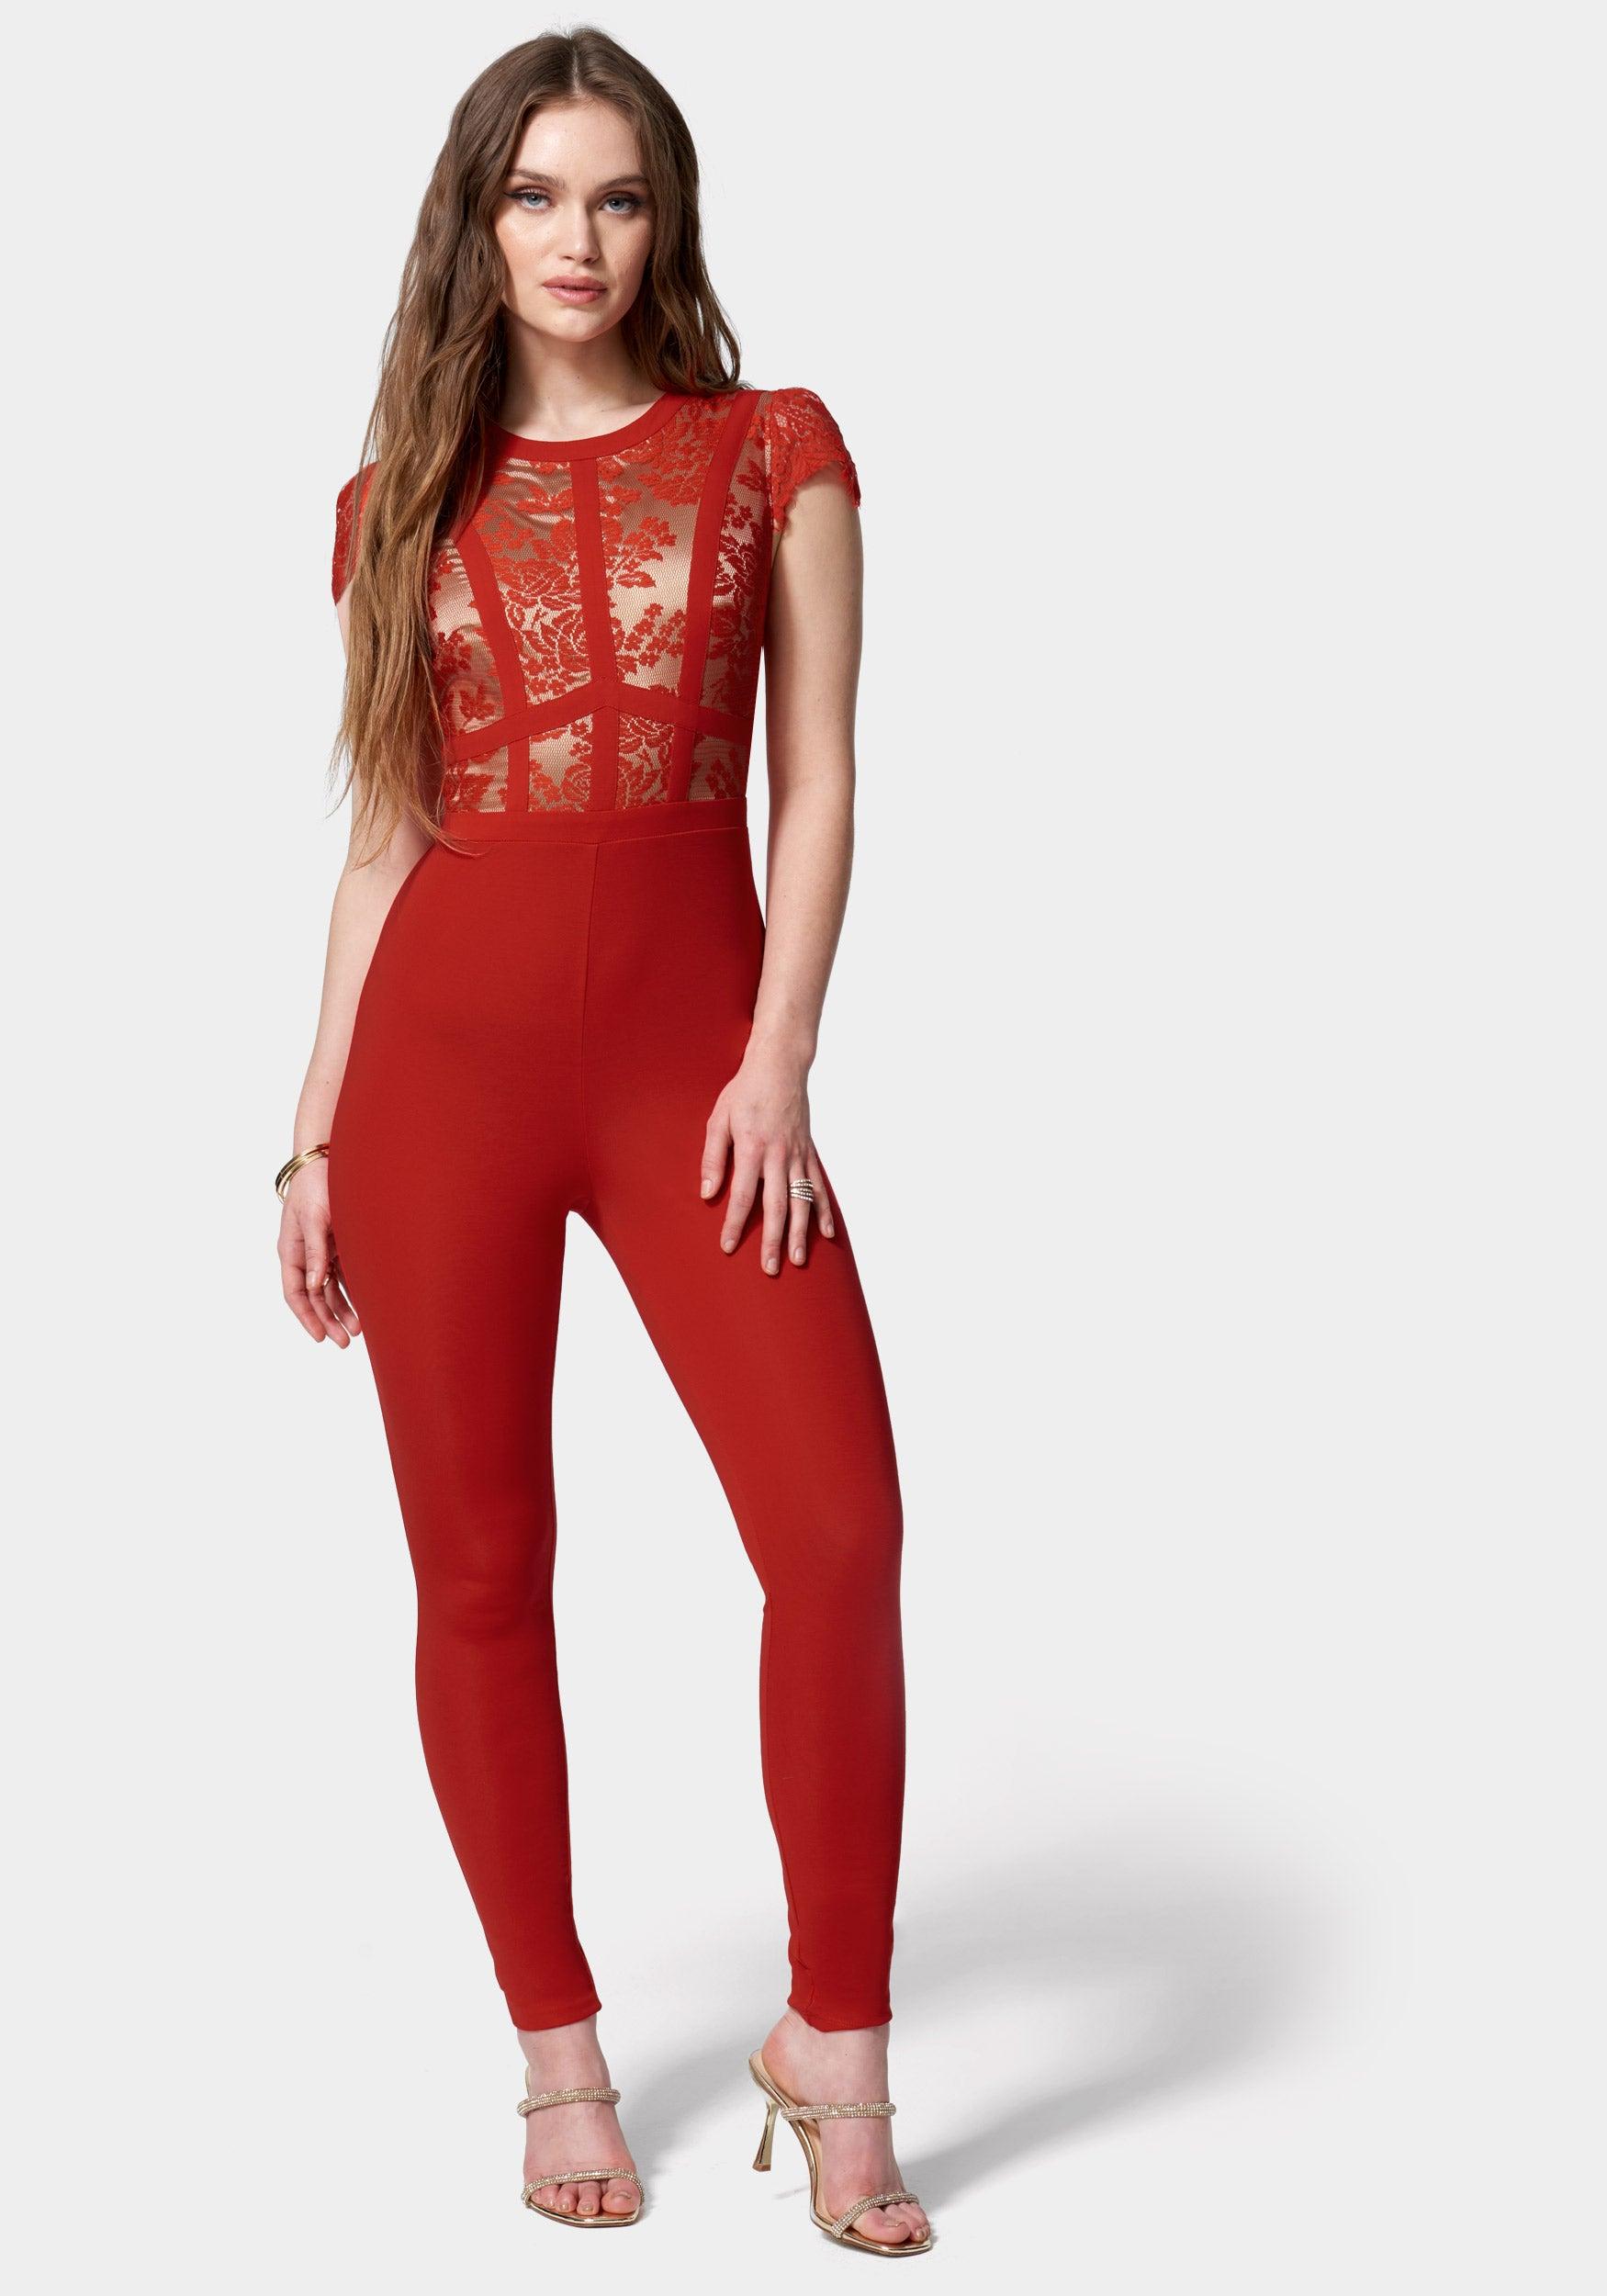 Bebe Caged Lace Catsuit in Red | Lyst